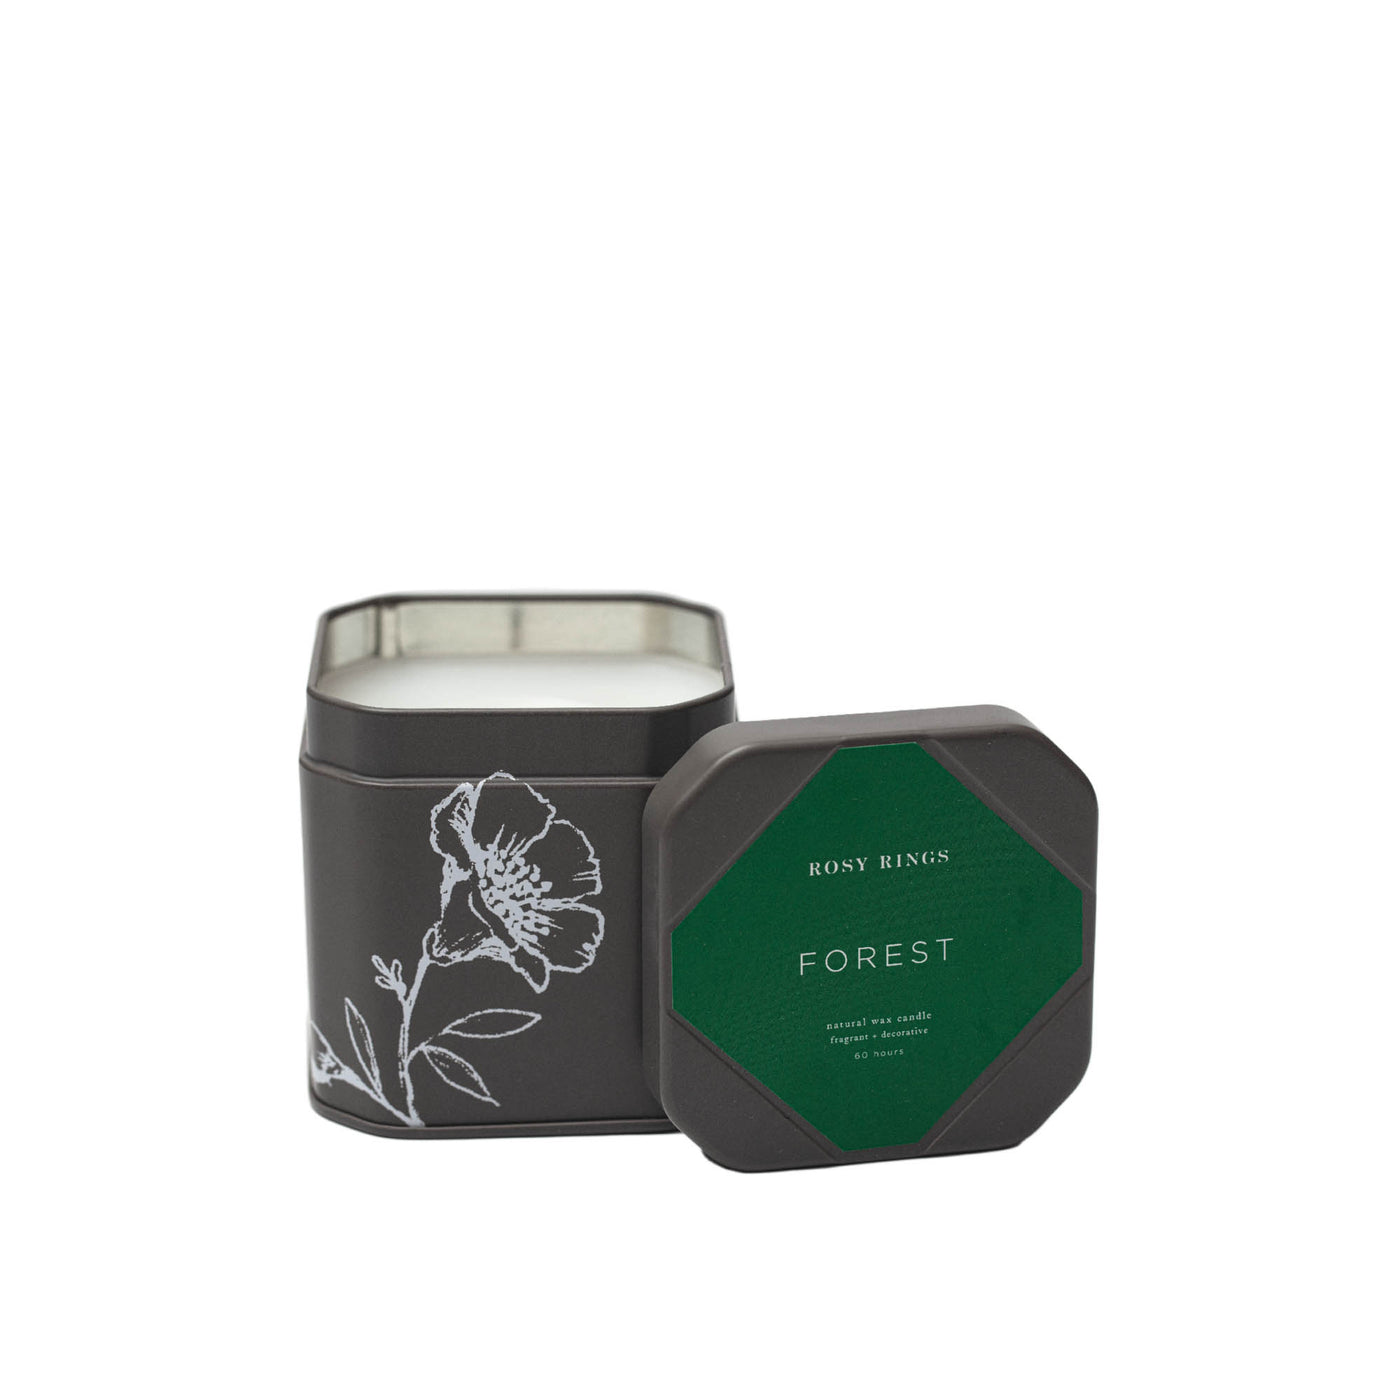 The Vanilla + Forest Gift Set